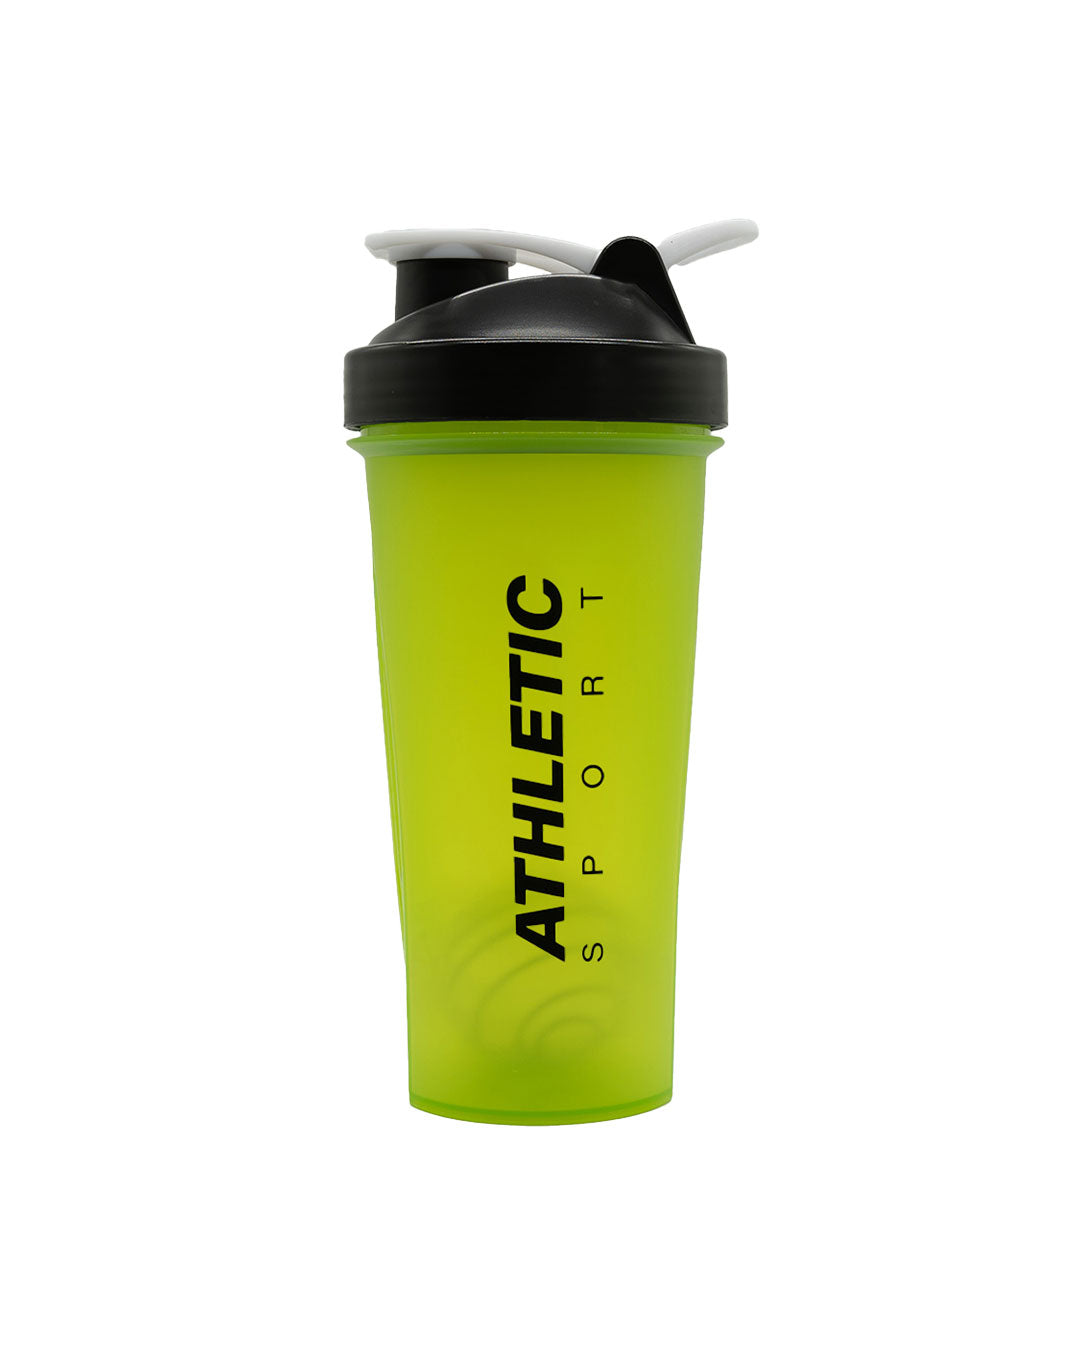 ATHLETIC SPORT SHAKER - CLEAR GREEN 700ml - Gift